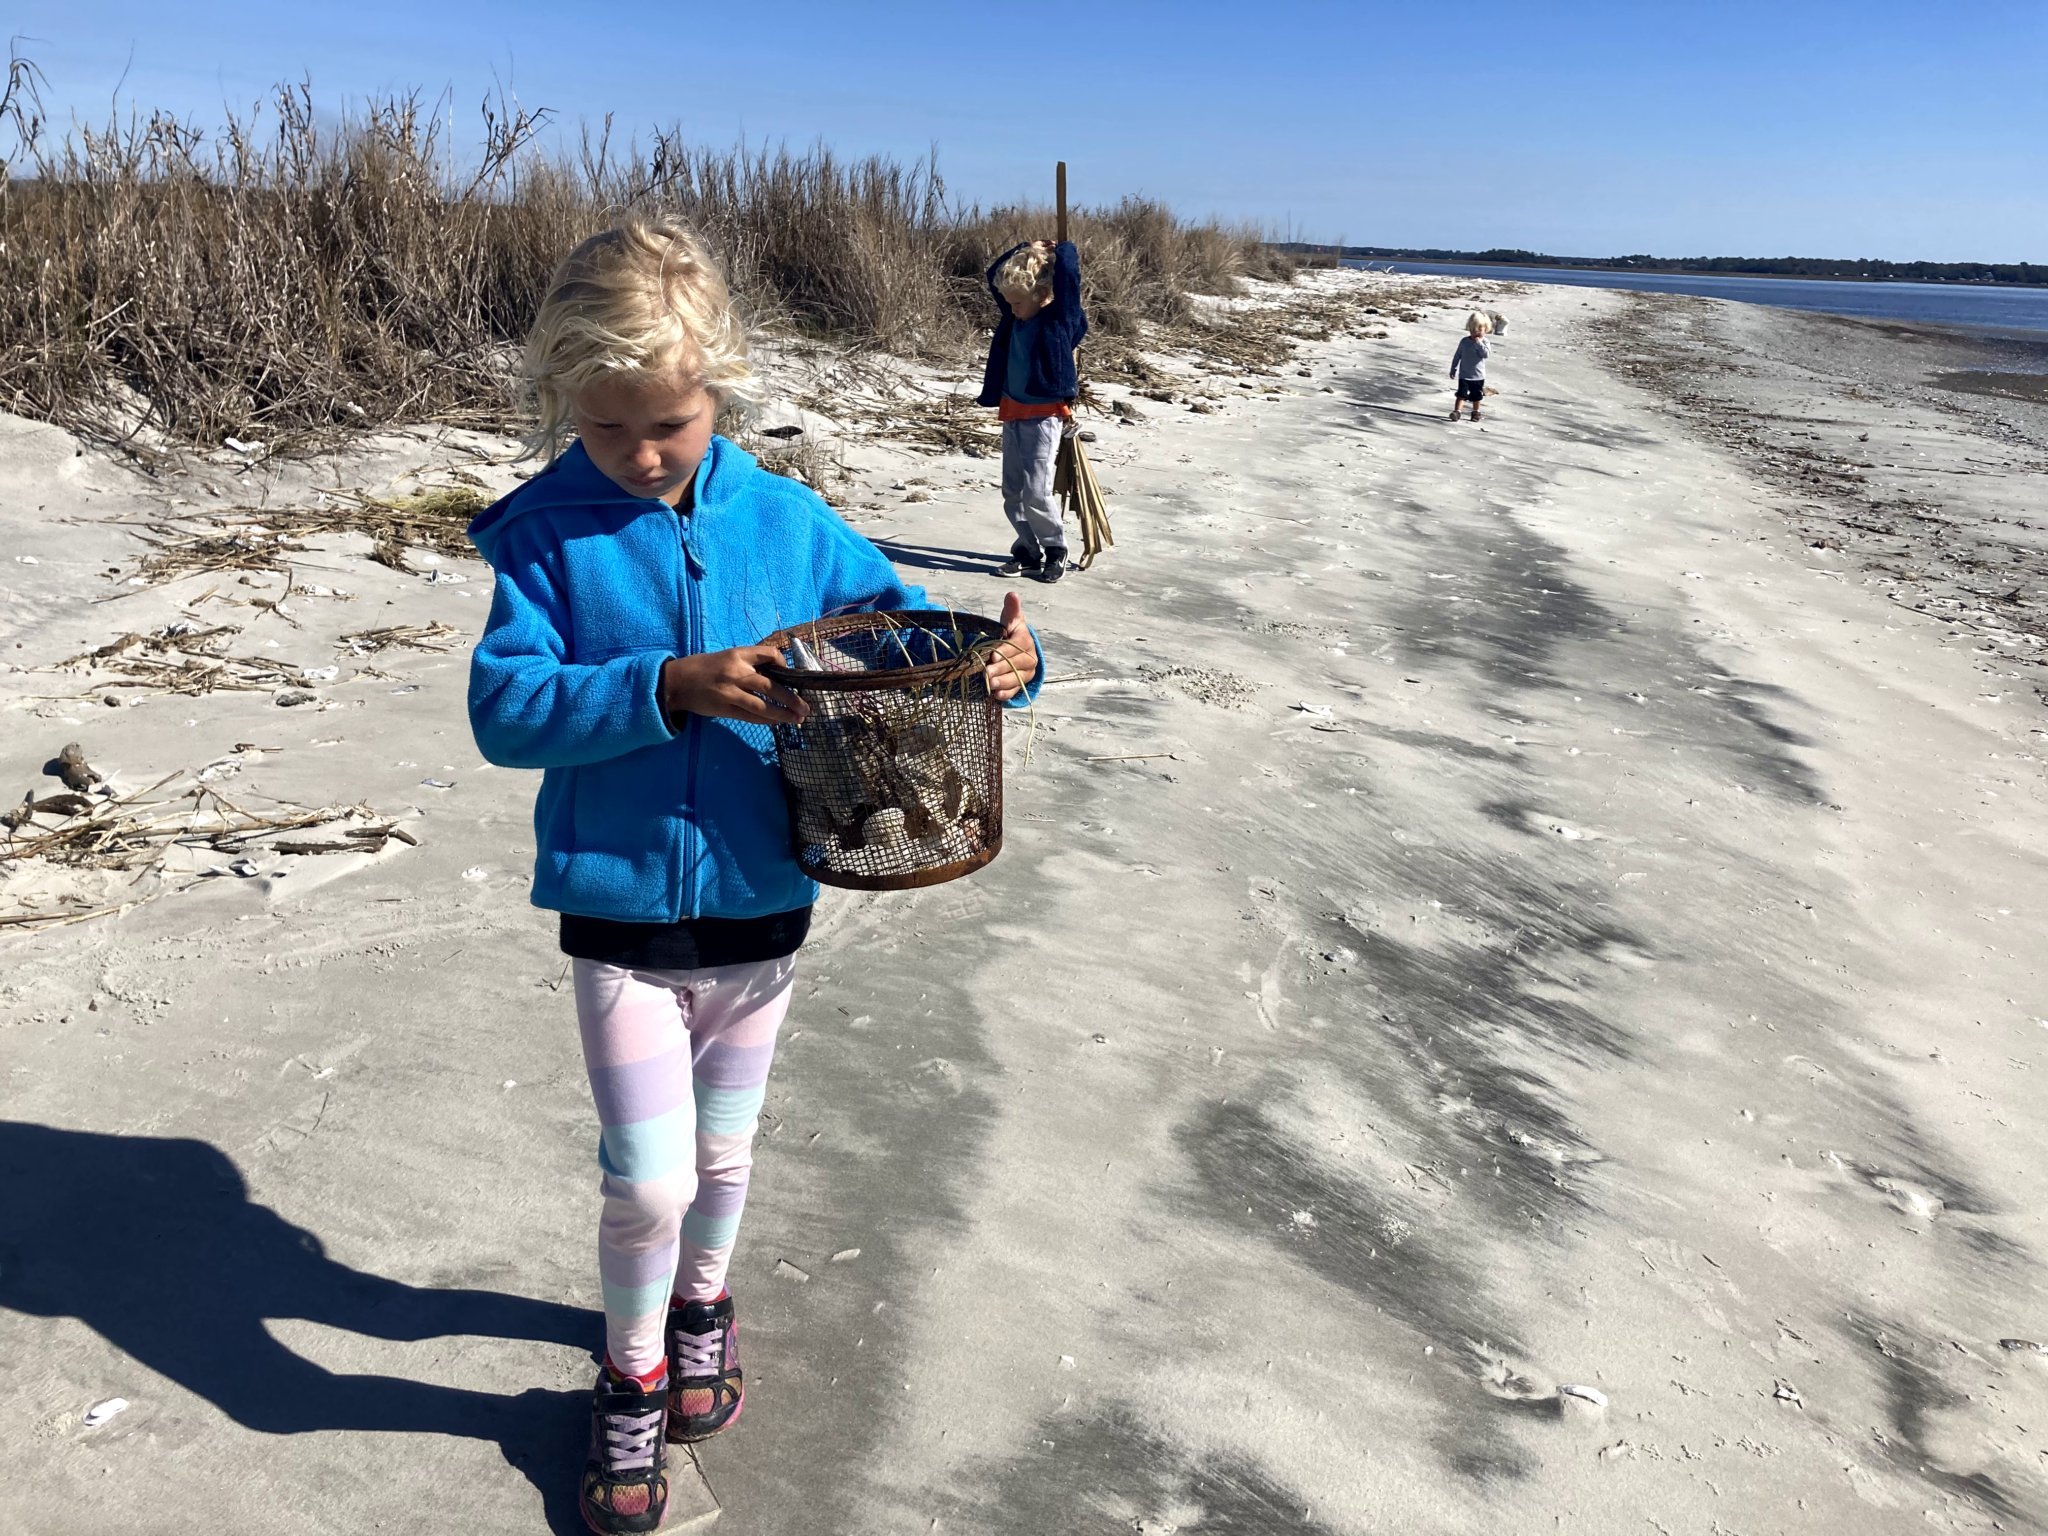 A young girl in a blue jacket carrying a bucket of things she found as she walks along a beach.